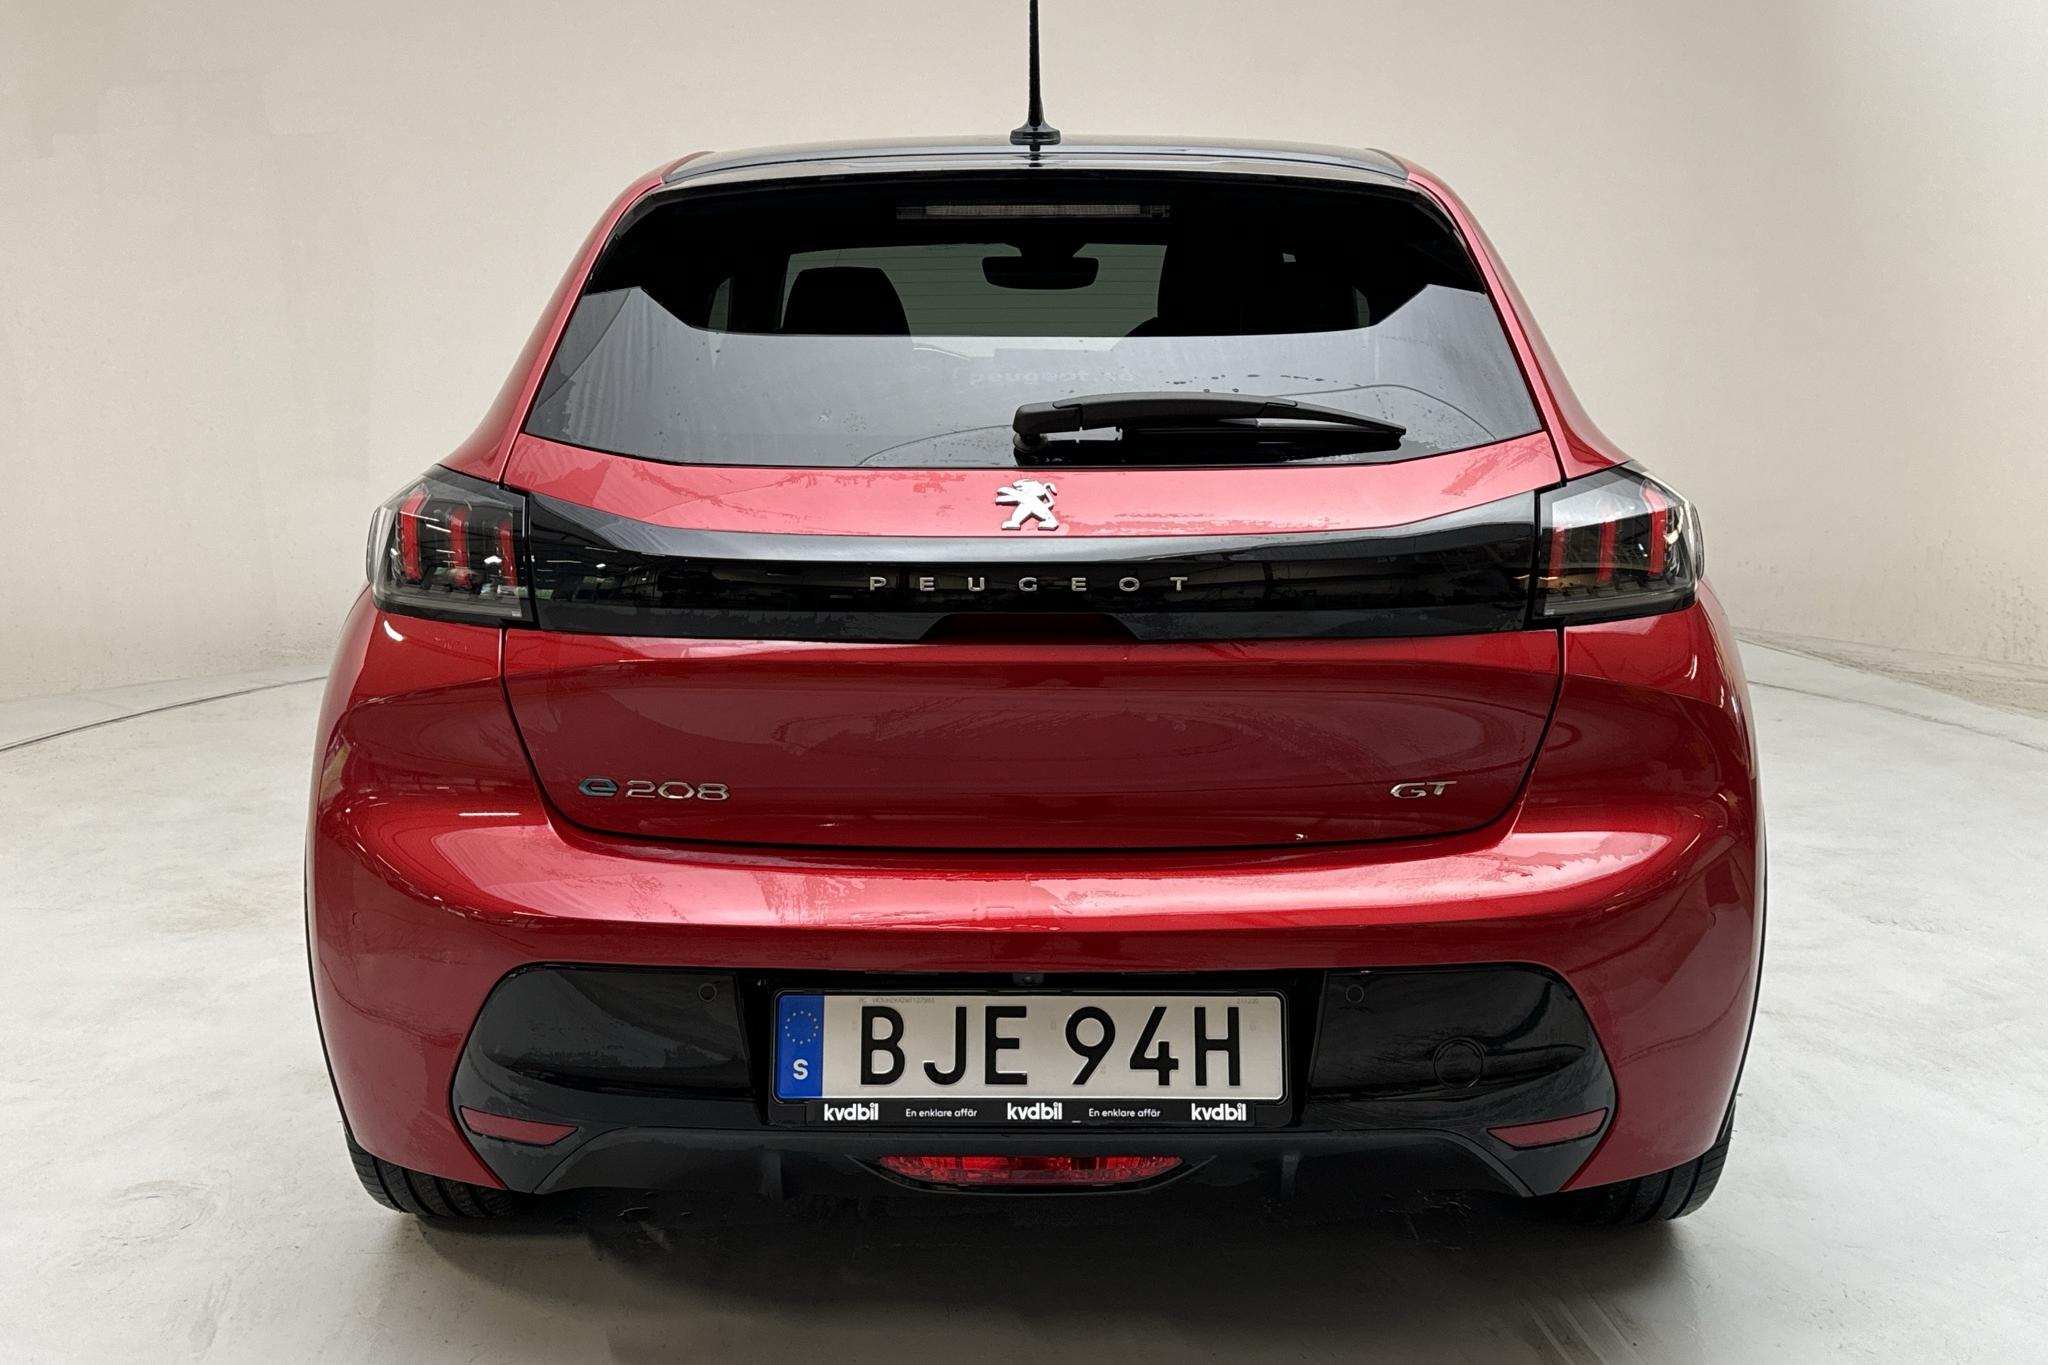 Peugeot e-208 50 kWh 5dr (136hk) - 17 370 km - Automatic - red - 2021